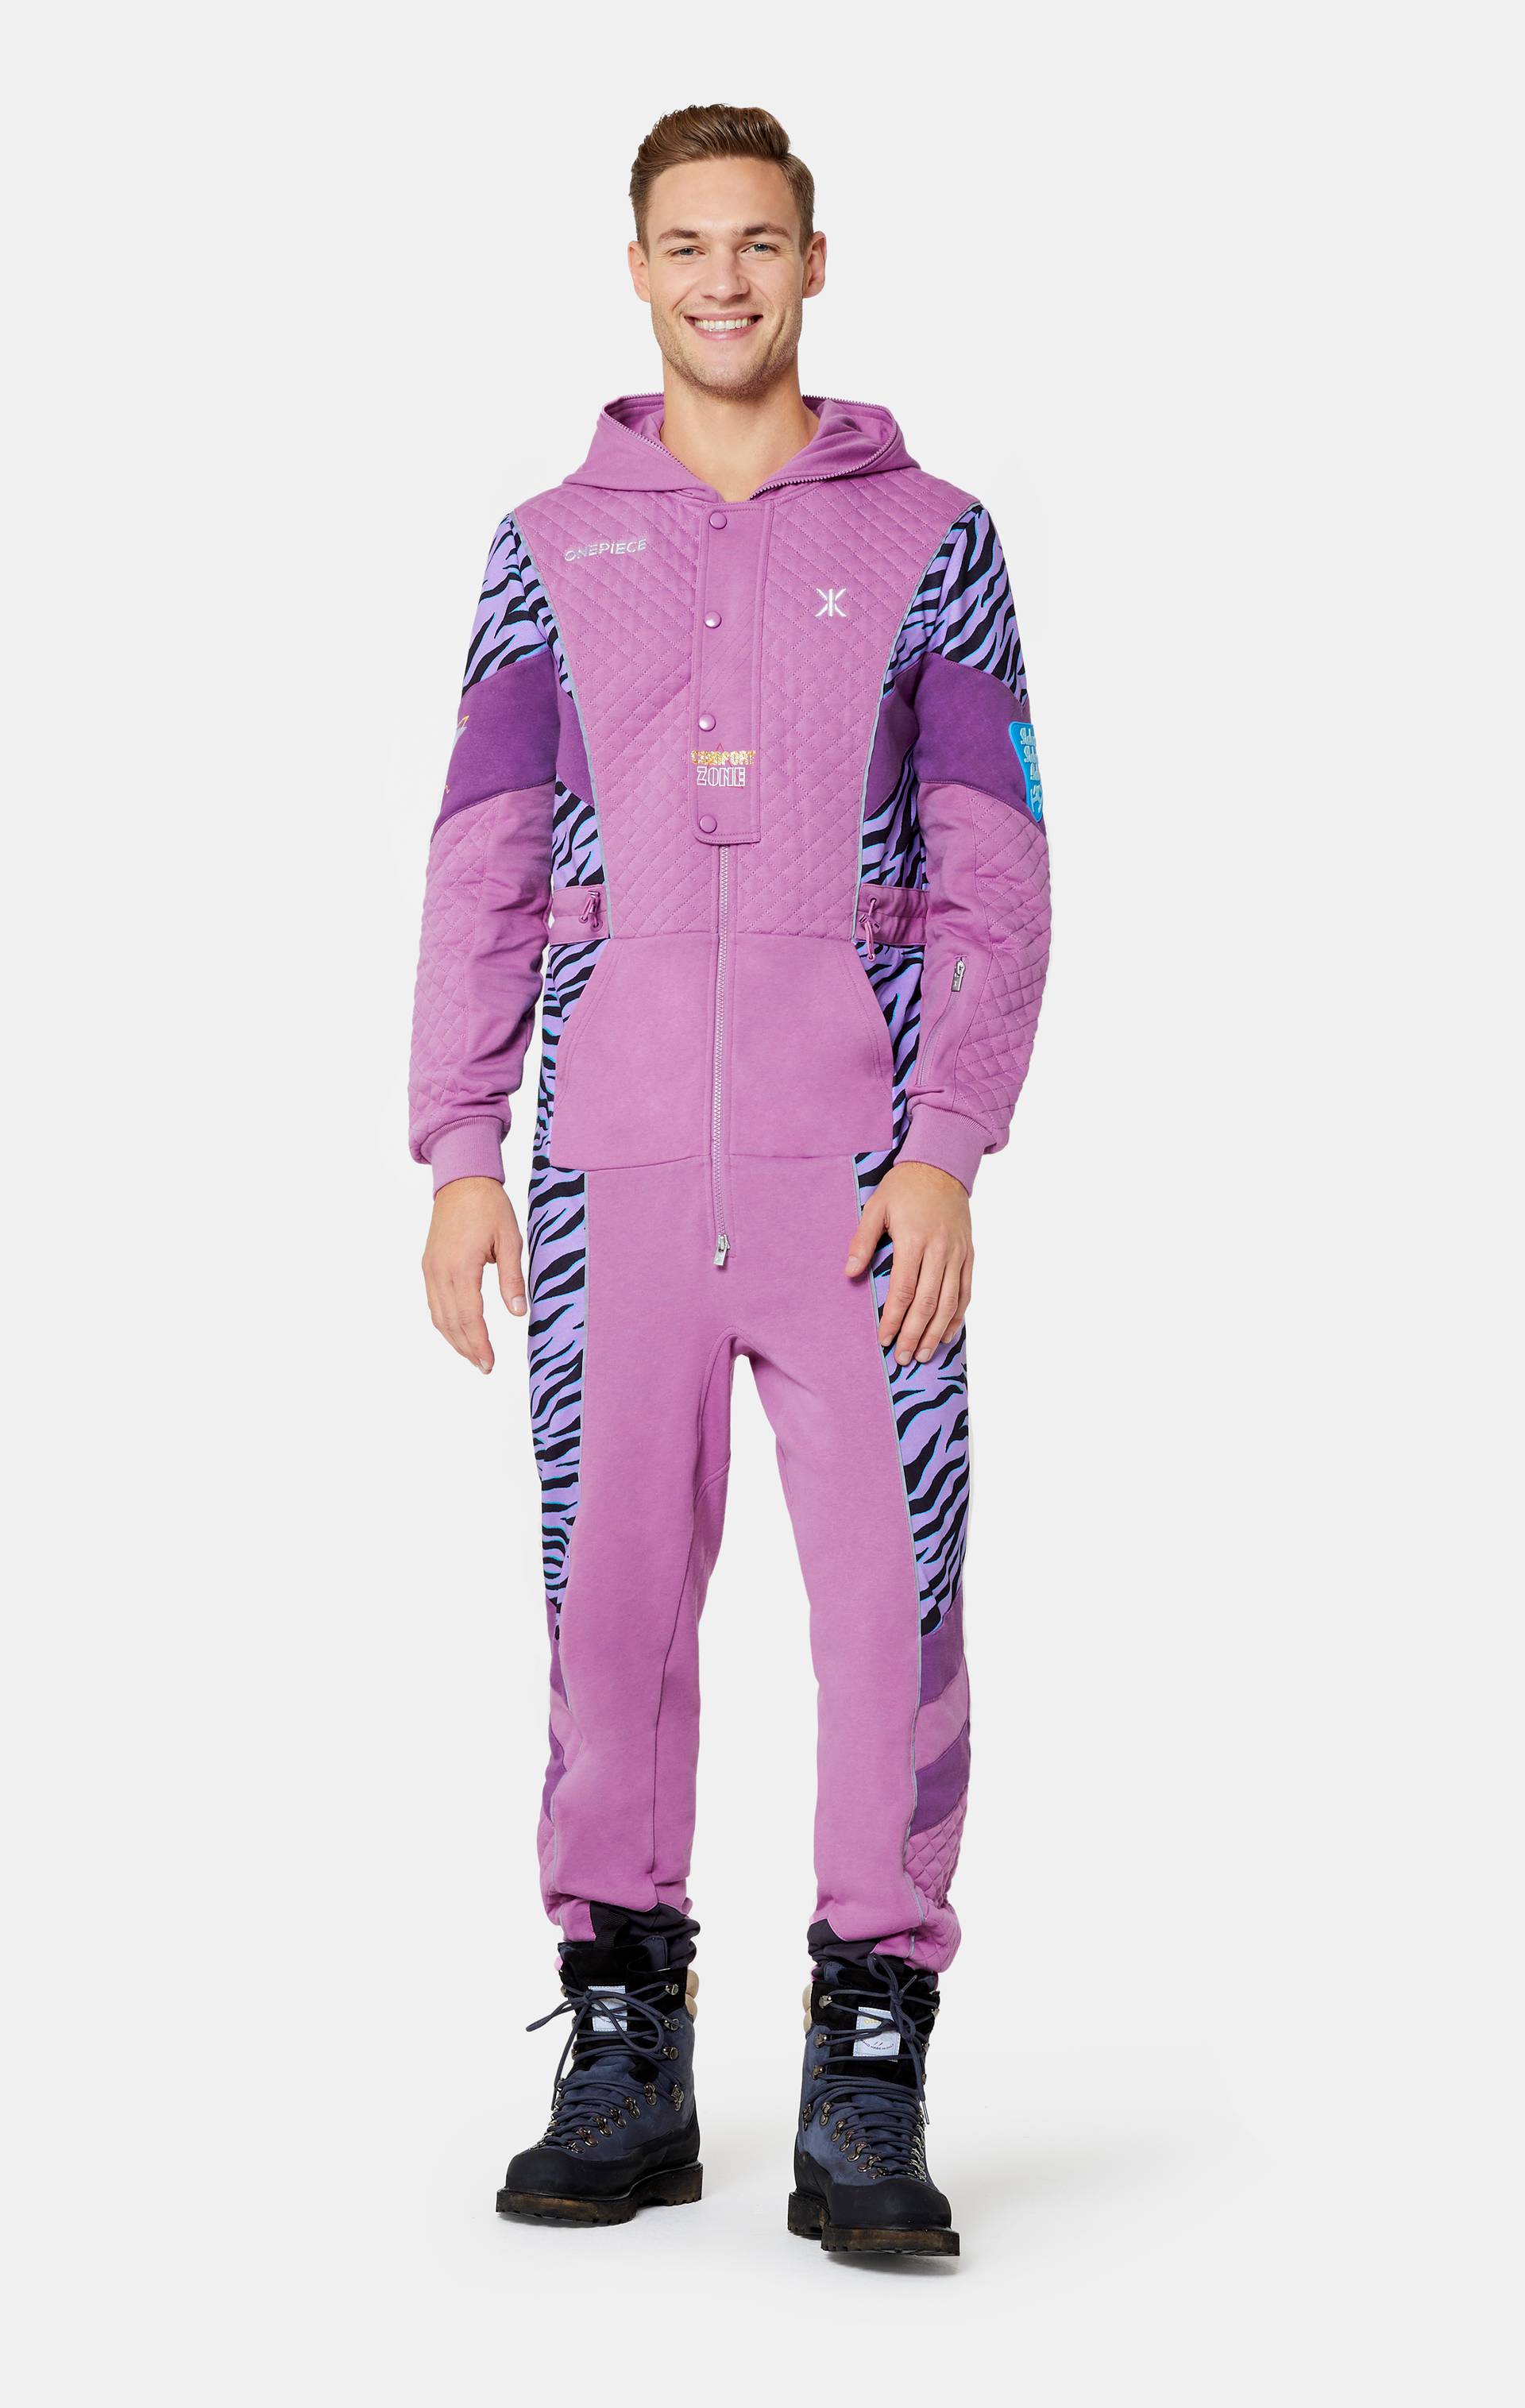 Onepiece Throwback Skiing Jumpsuit Pink - 2